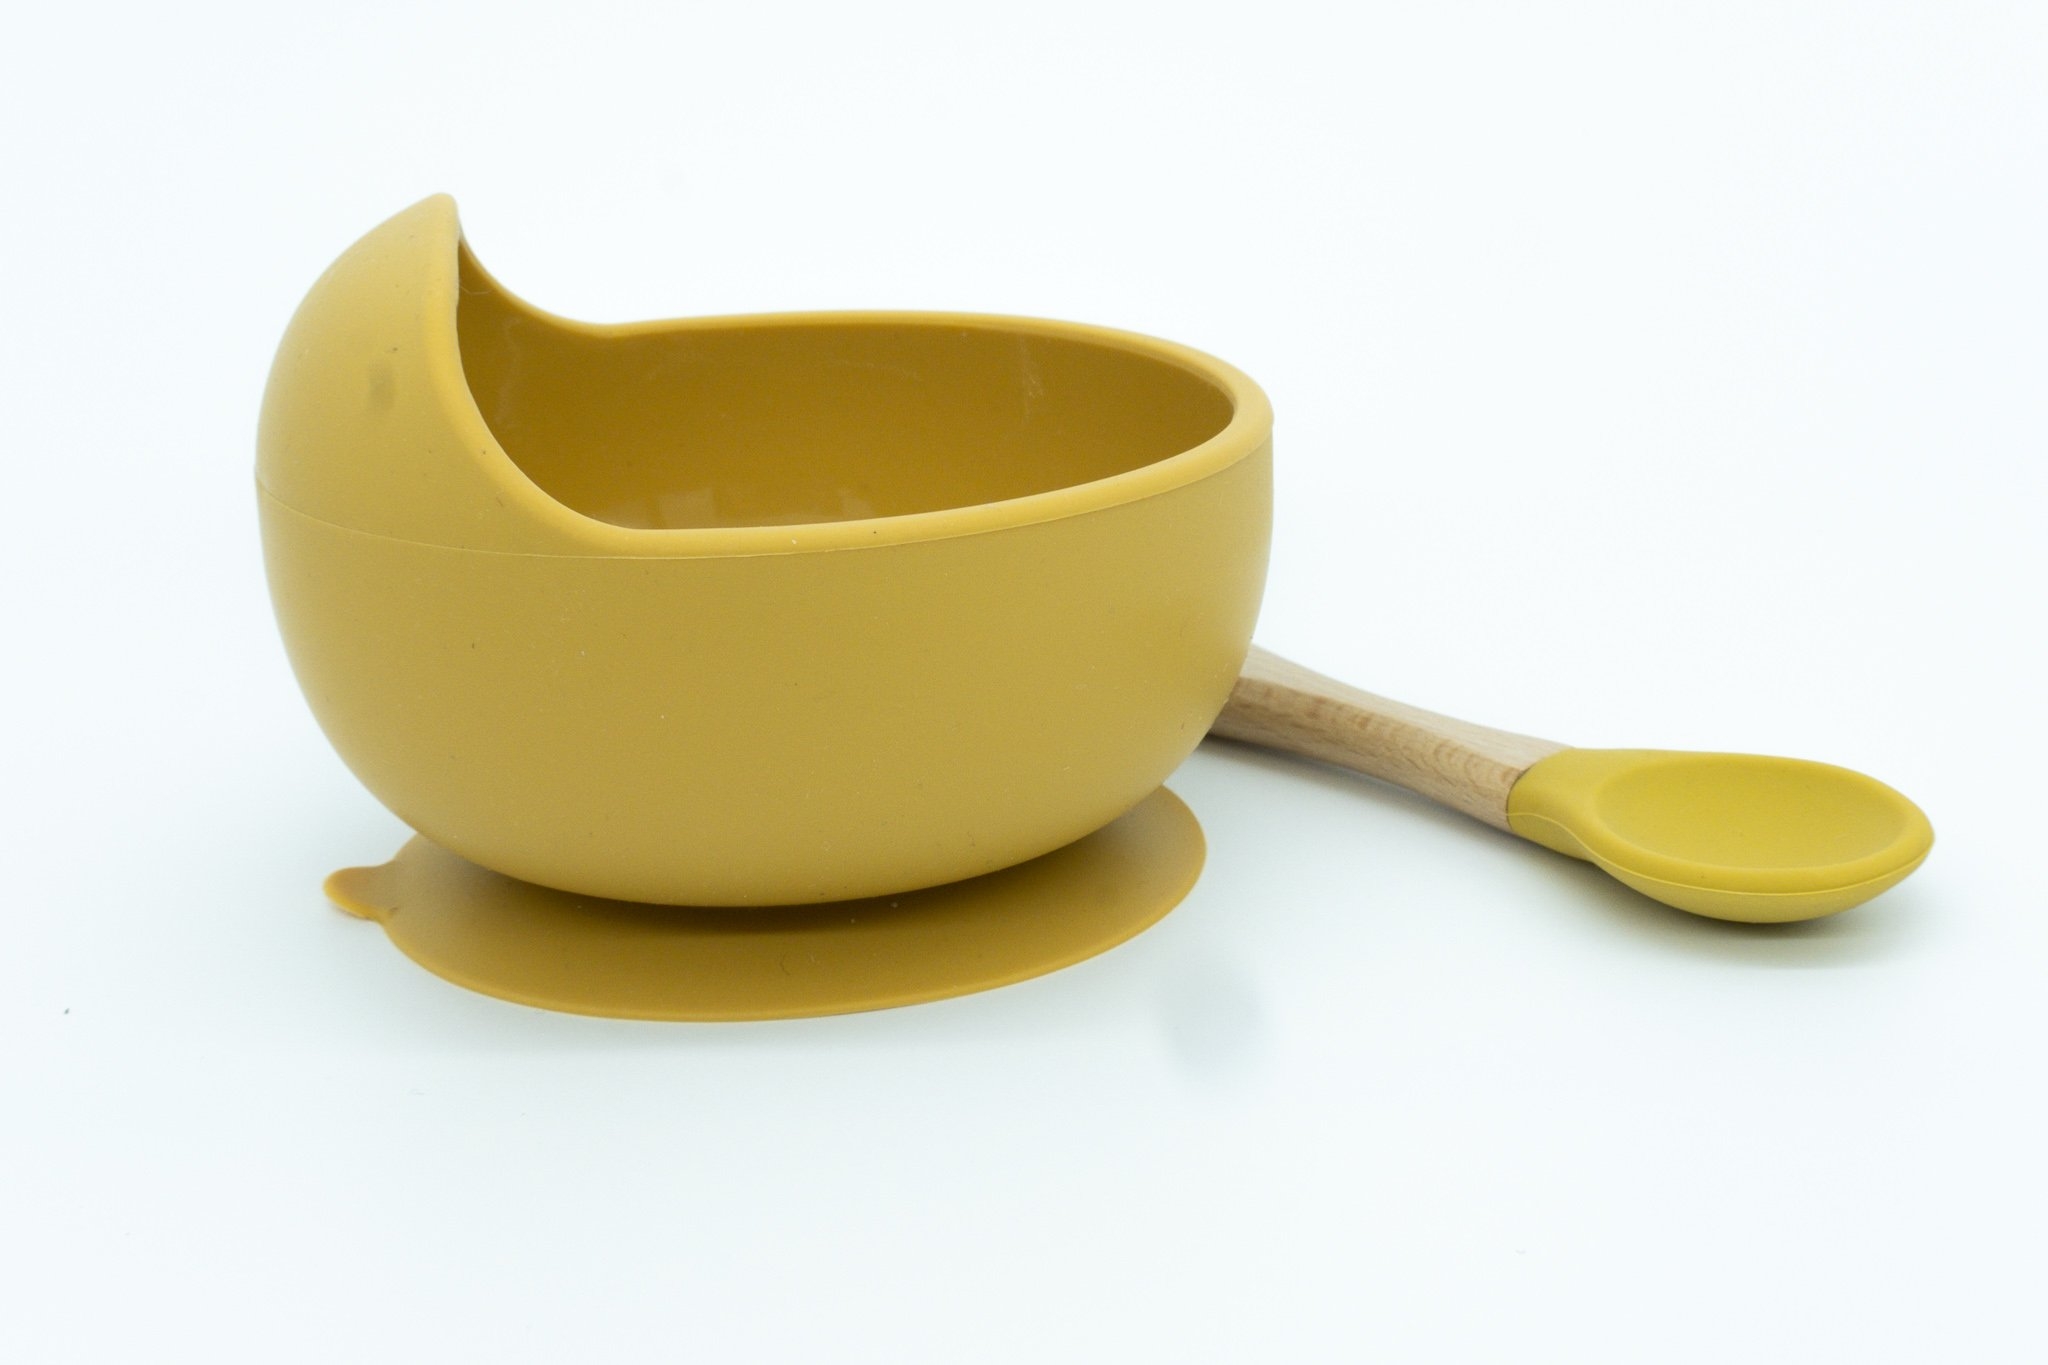 INOBY Silicone Suction Bowl and Spoon Set Mustard Yellow